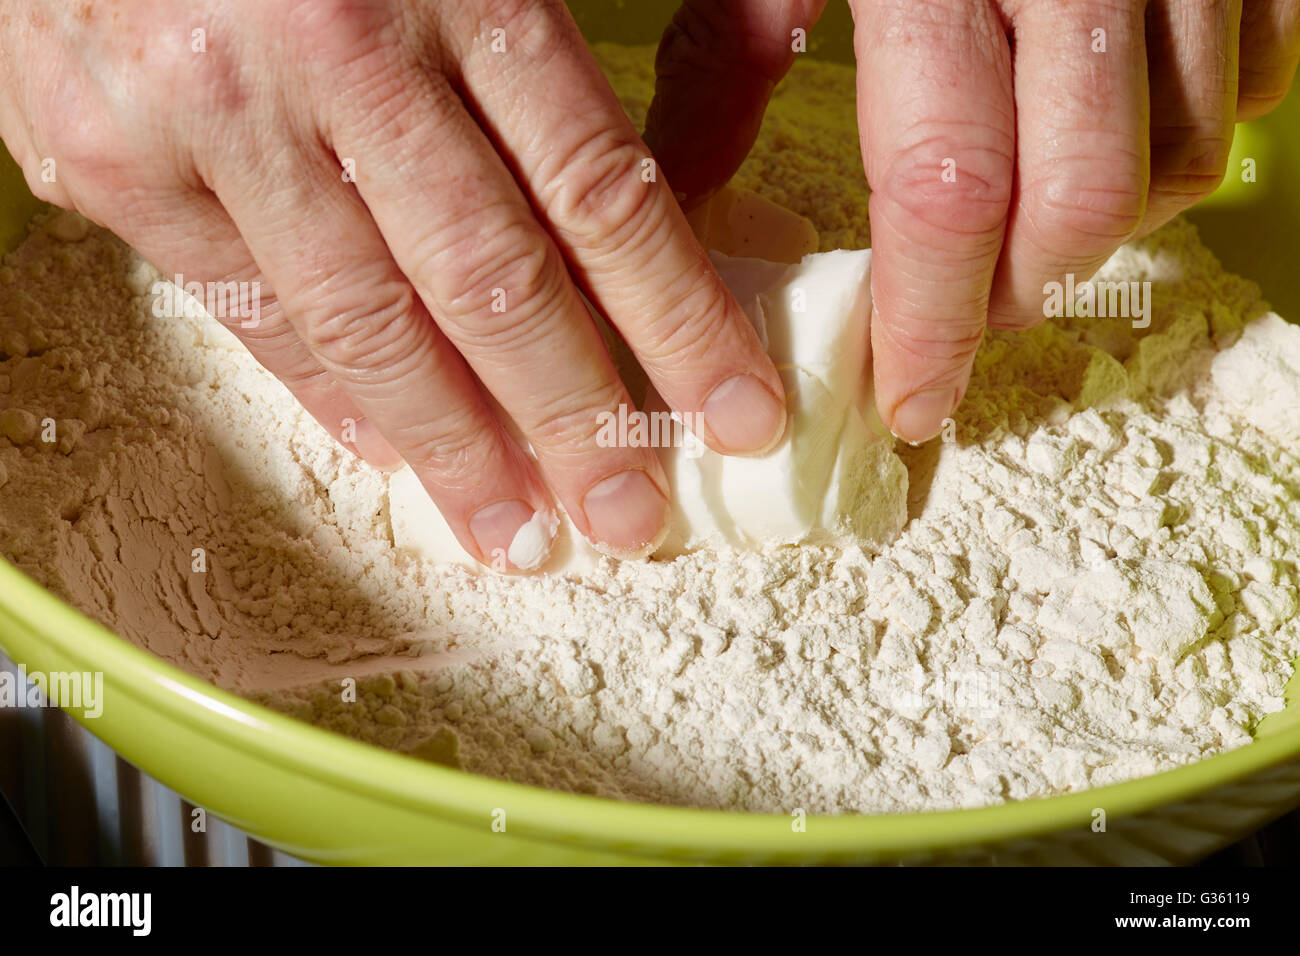 Man's hands kneading a pie (or pasty) crust dough with flour and shortening Stock Photo